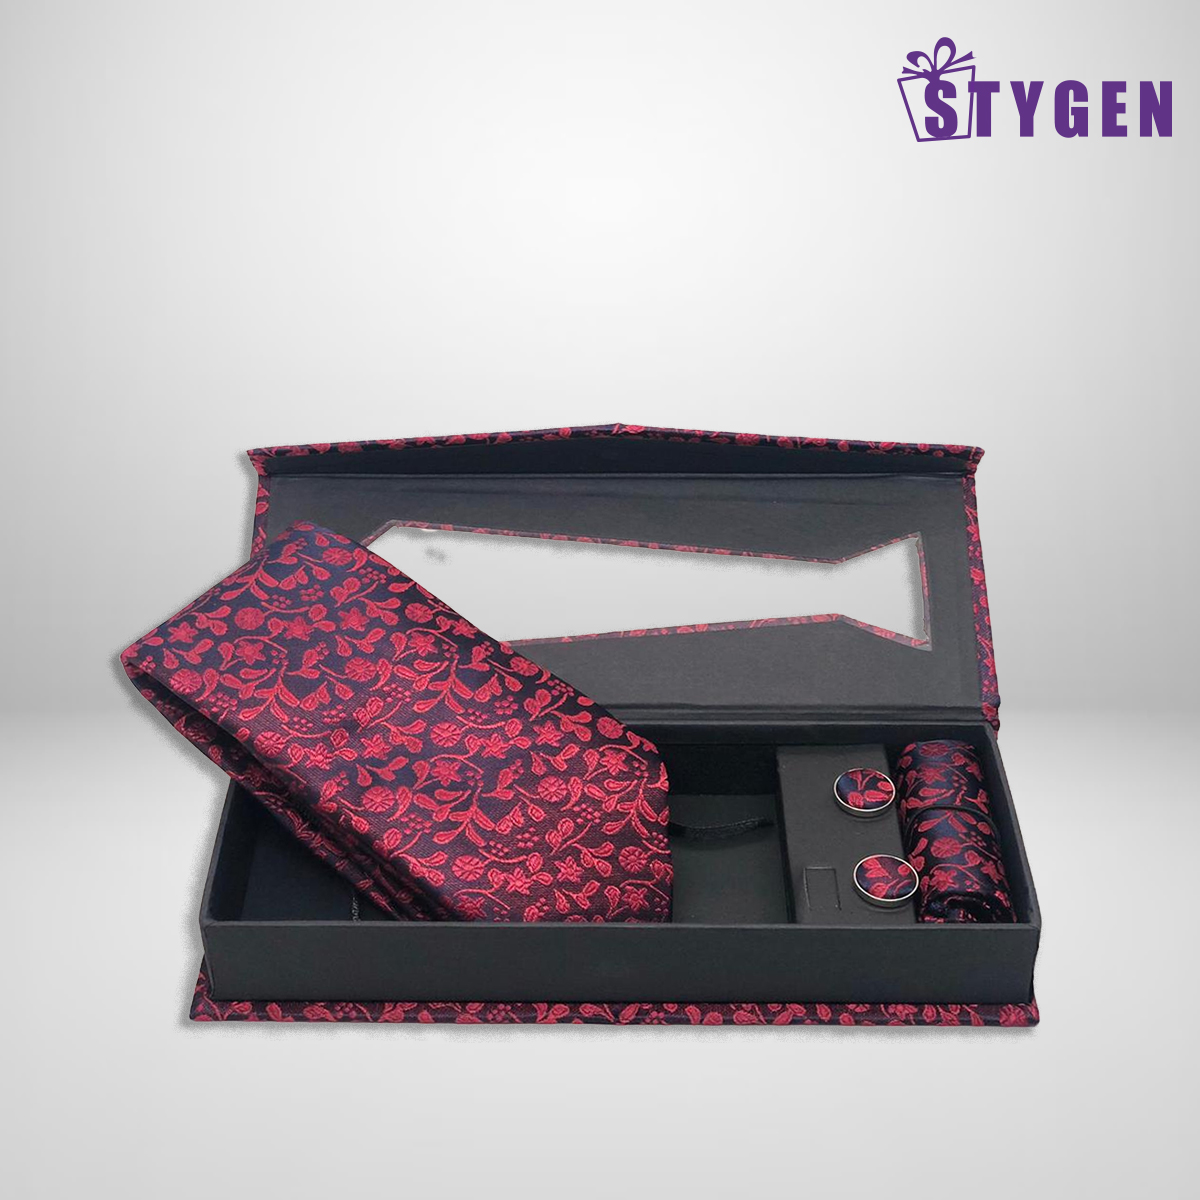 Tie with Cufflink & Pocket Square - Maroon Floral